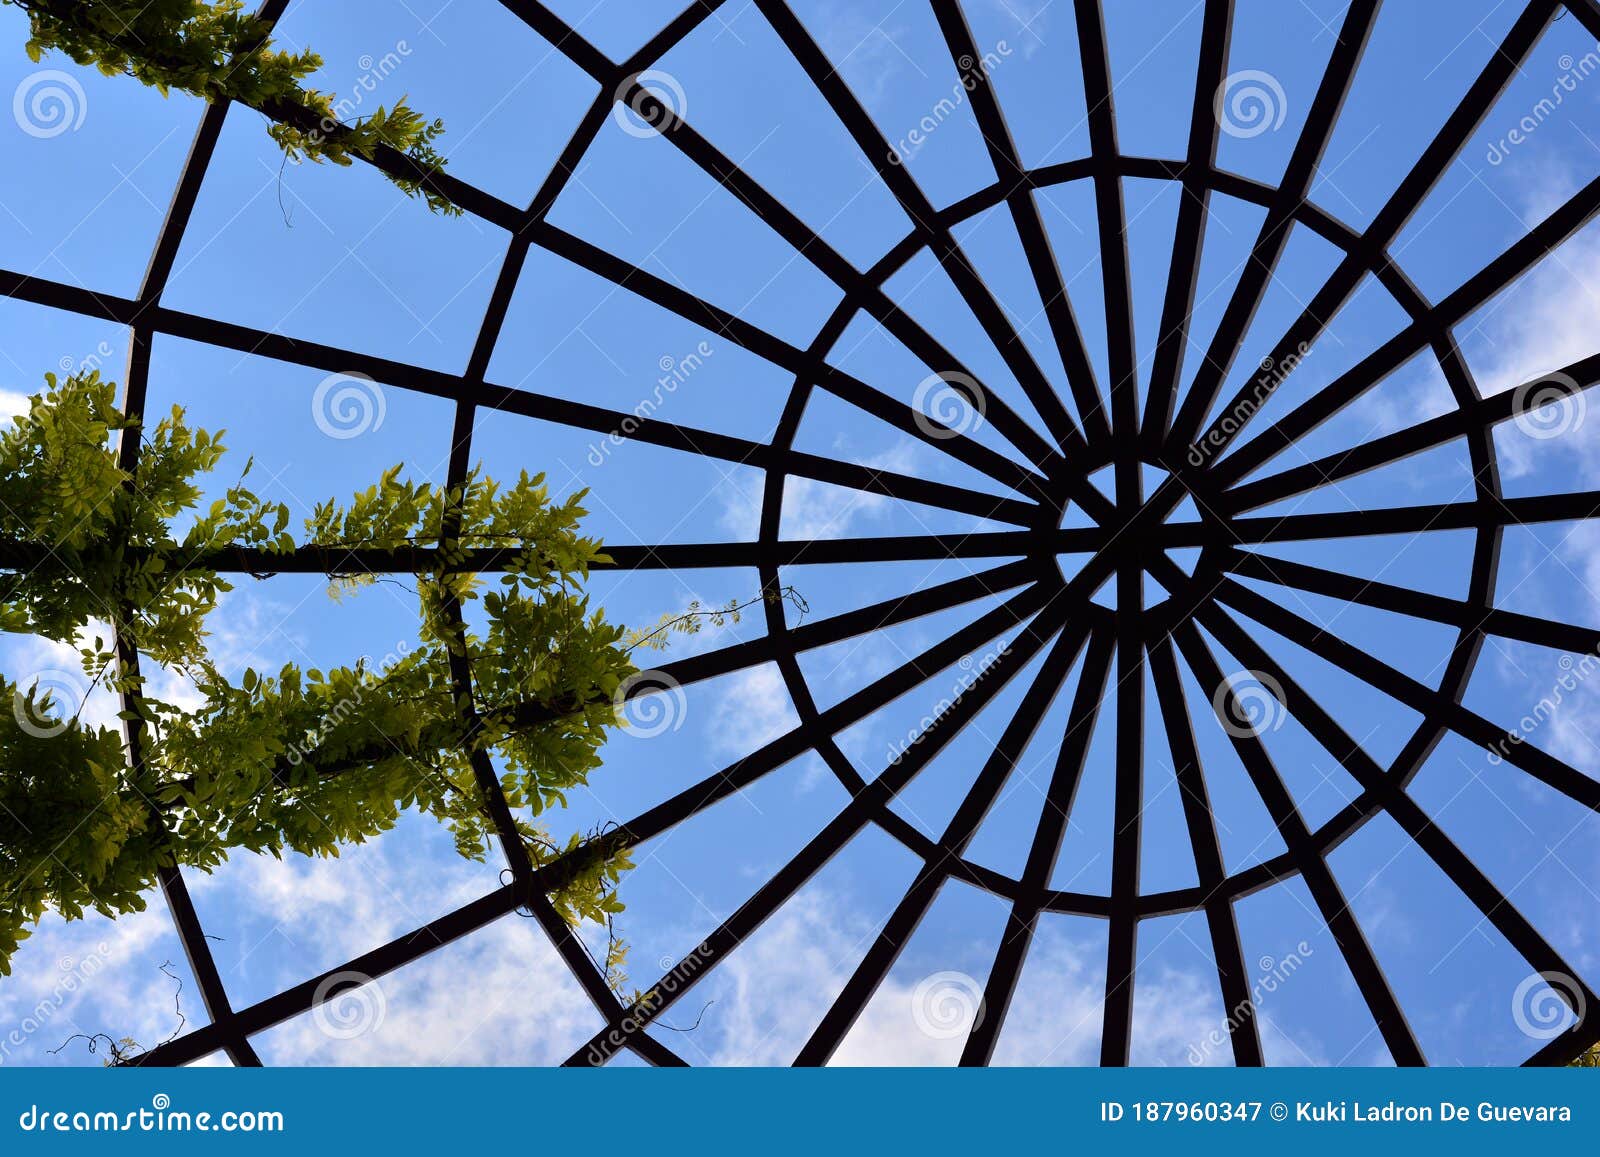 structure of a steel dome